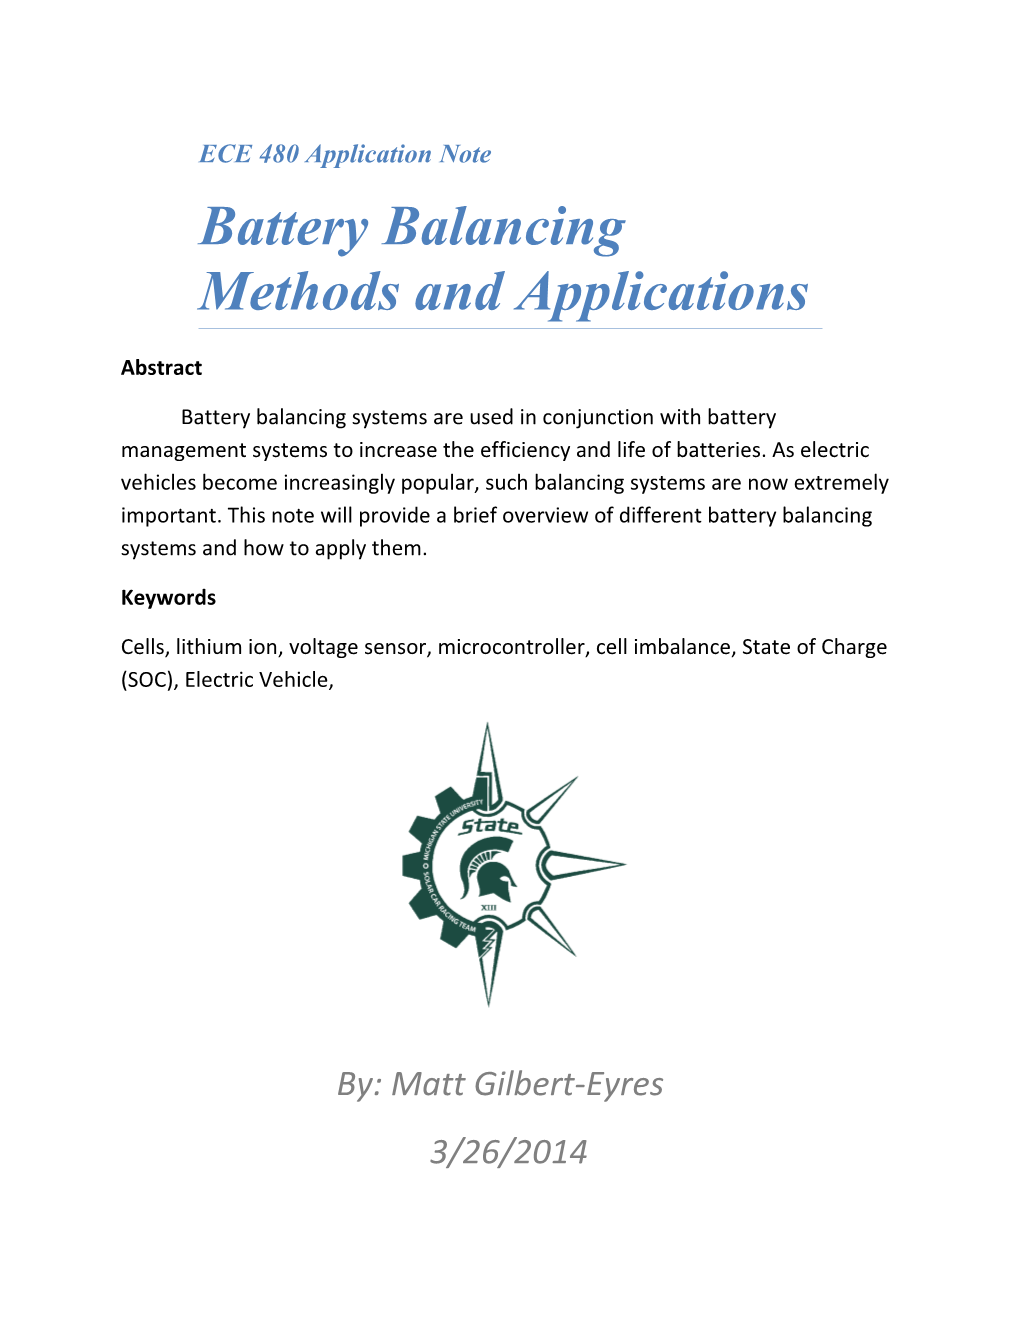 Battery Balancing Methods and Applications